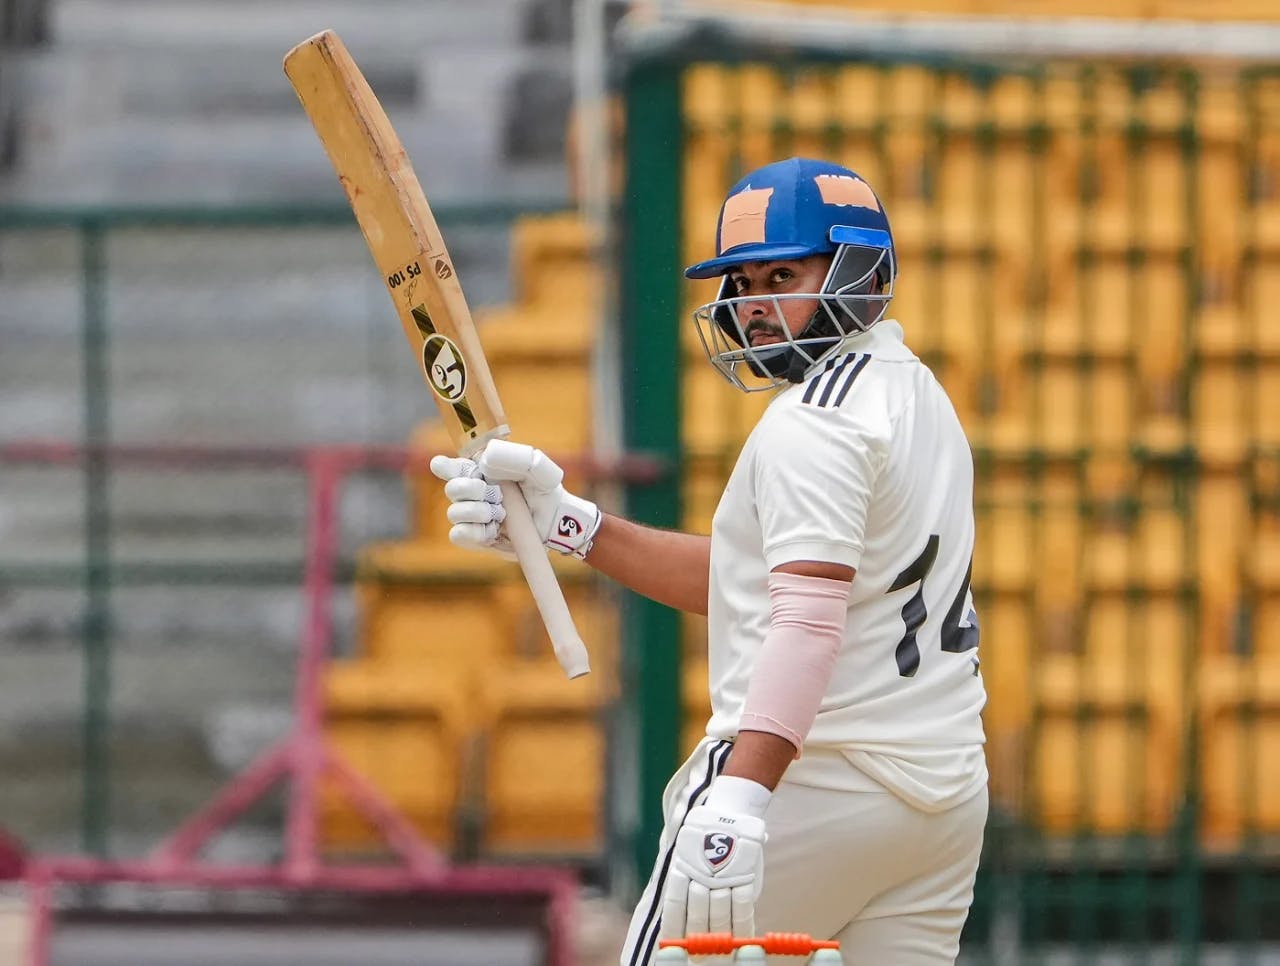 BAD News For Prithvi Shaw! Star Batter Likely To Stay Out Of Action For 3-4  Months Due To Knee Injury – Report